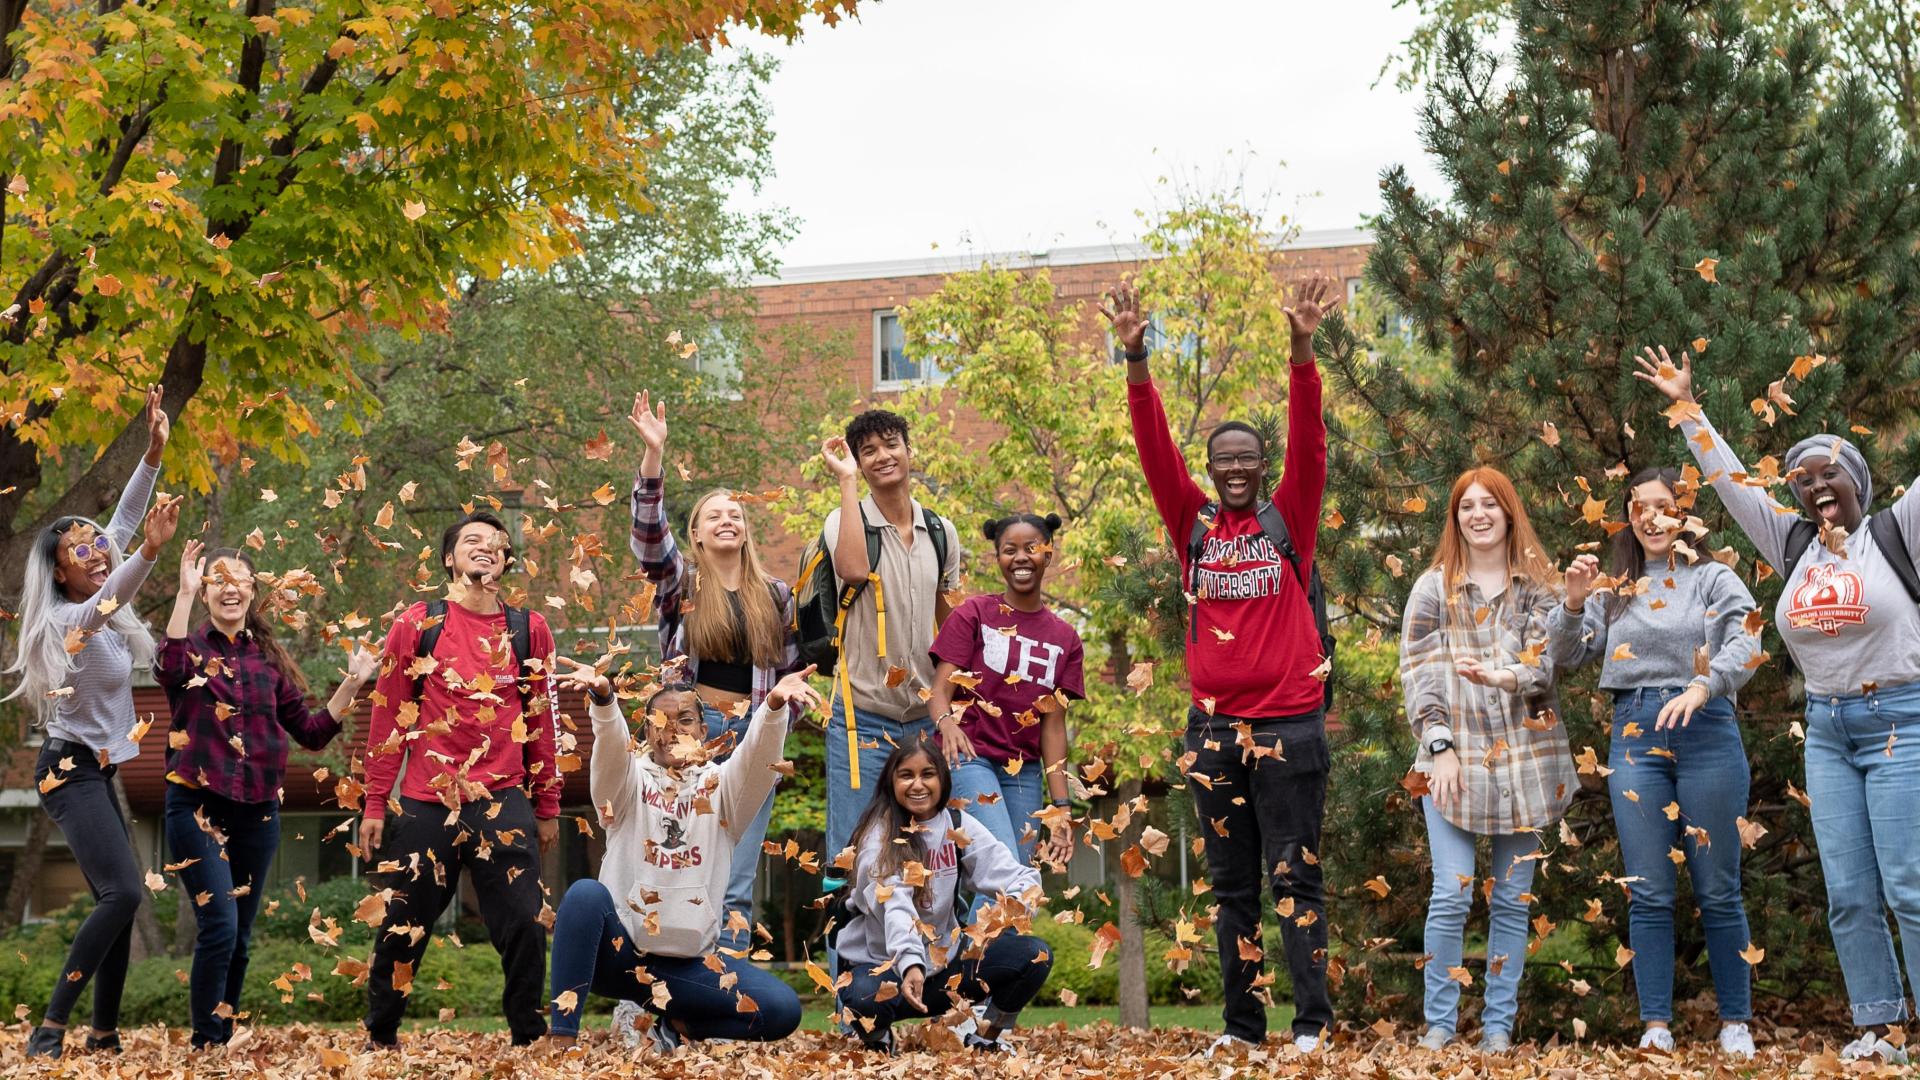  Hamline happy students at Hamline during the fall blowing the leafs